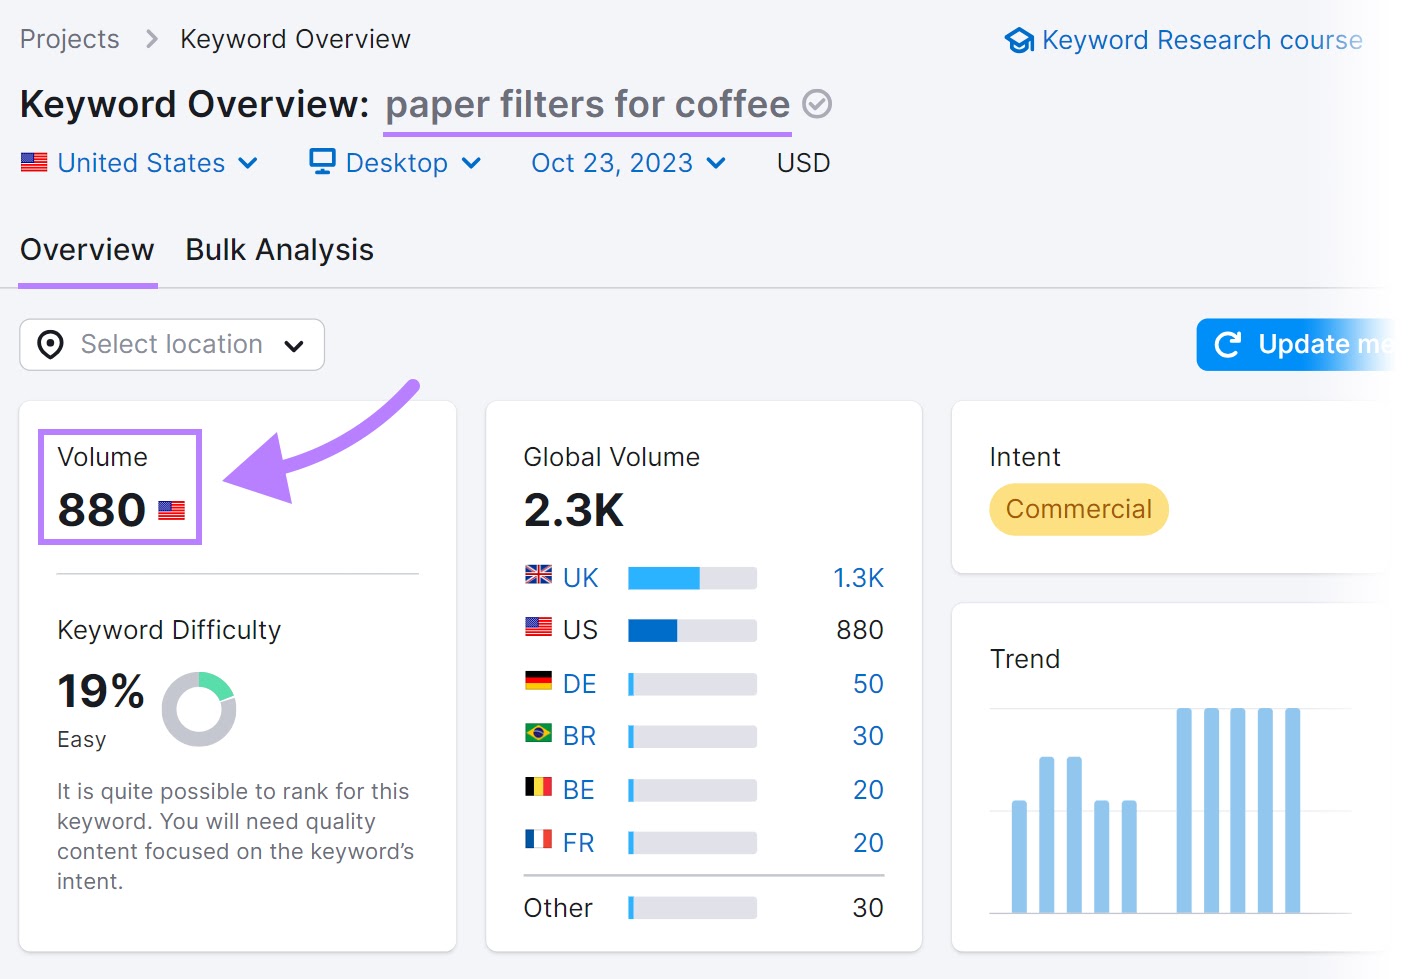 Keyword Overview dashboard for "paper filters for coffee" keyword